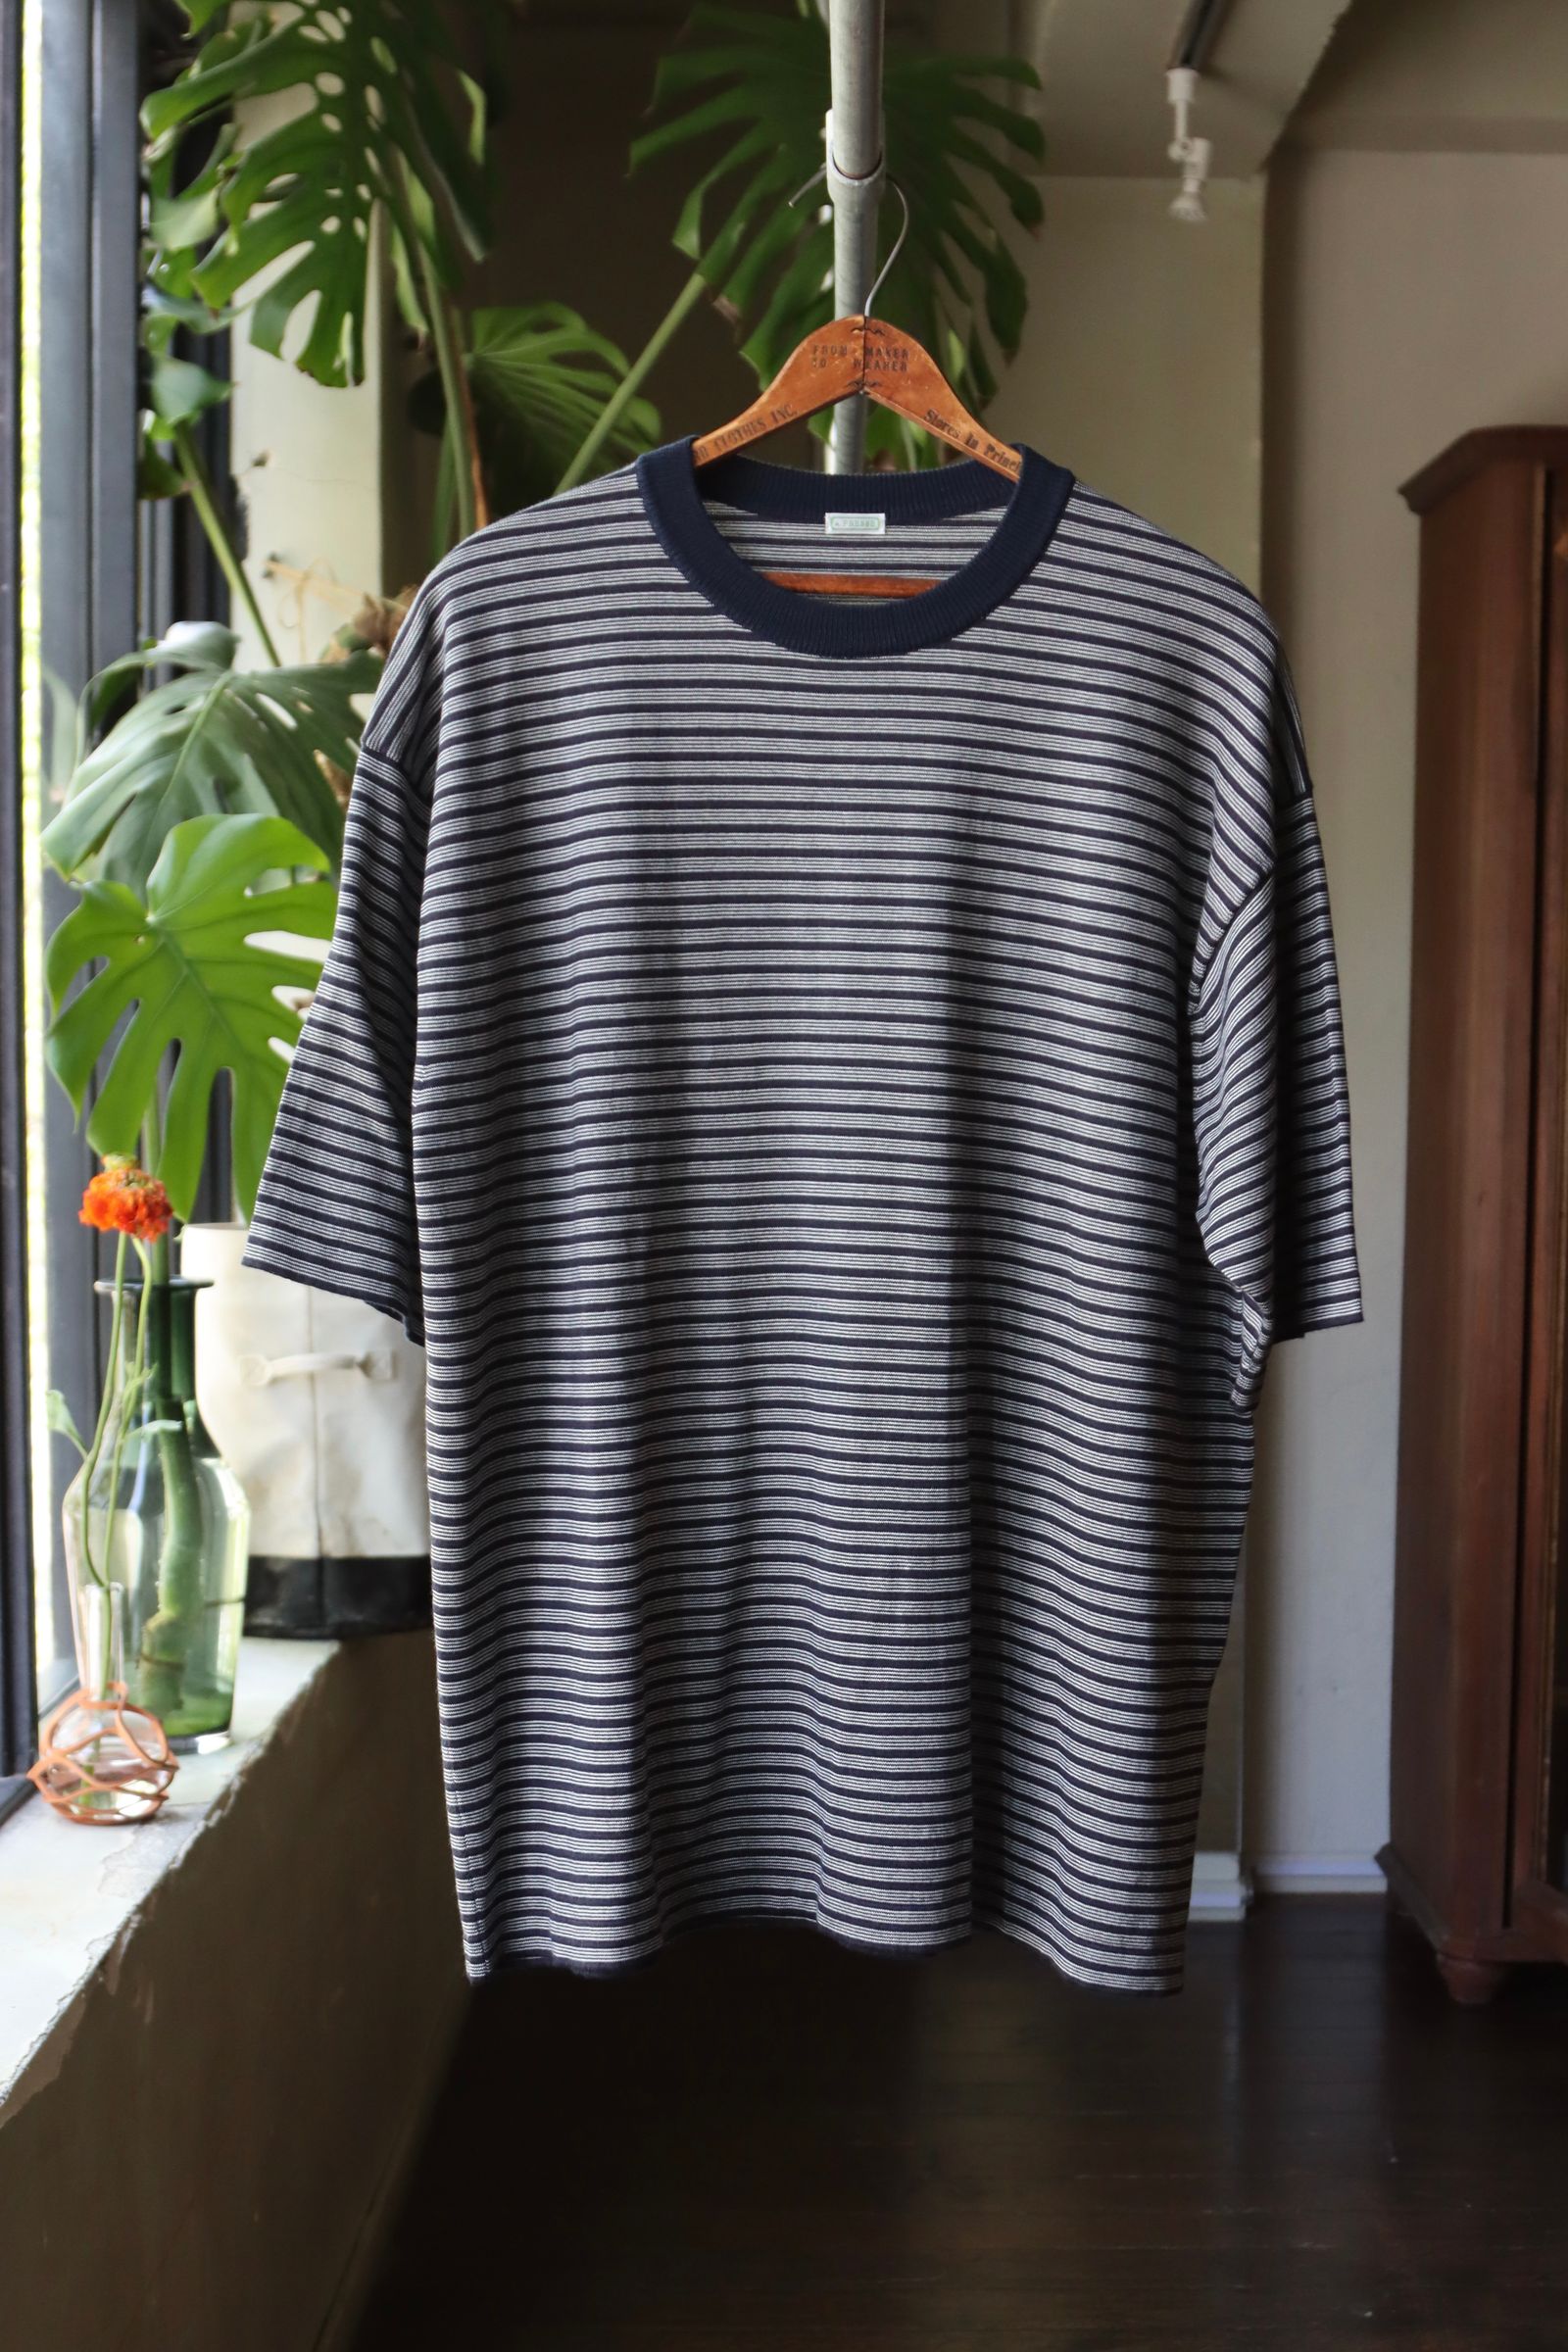 A.PRESSE High Gauge S S Striped T-Shirt - トップス